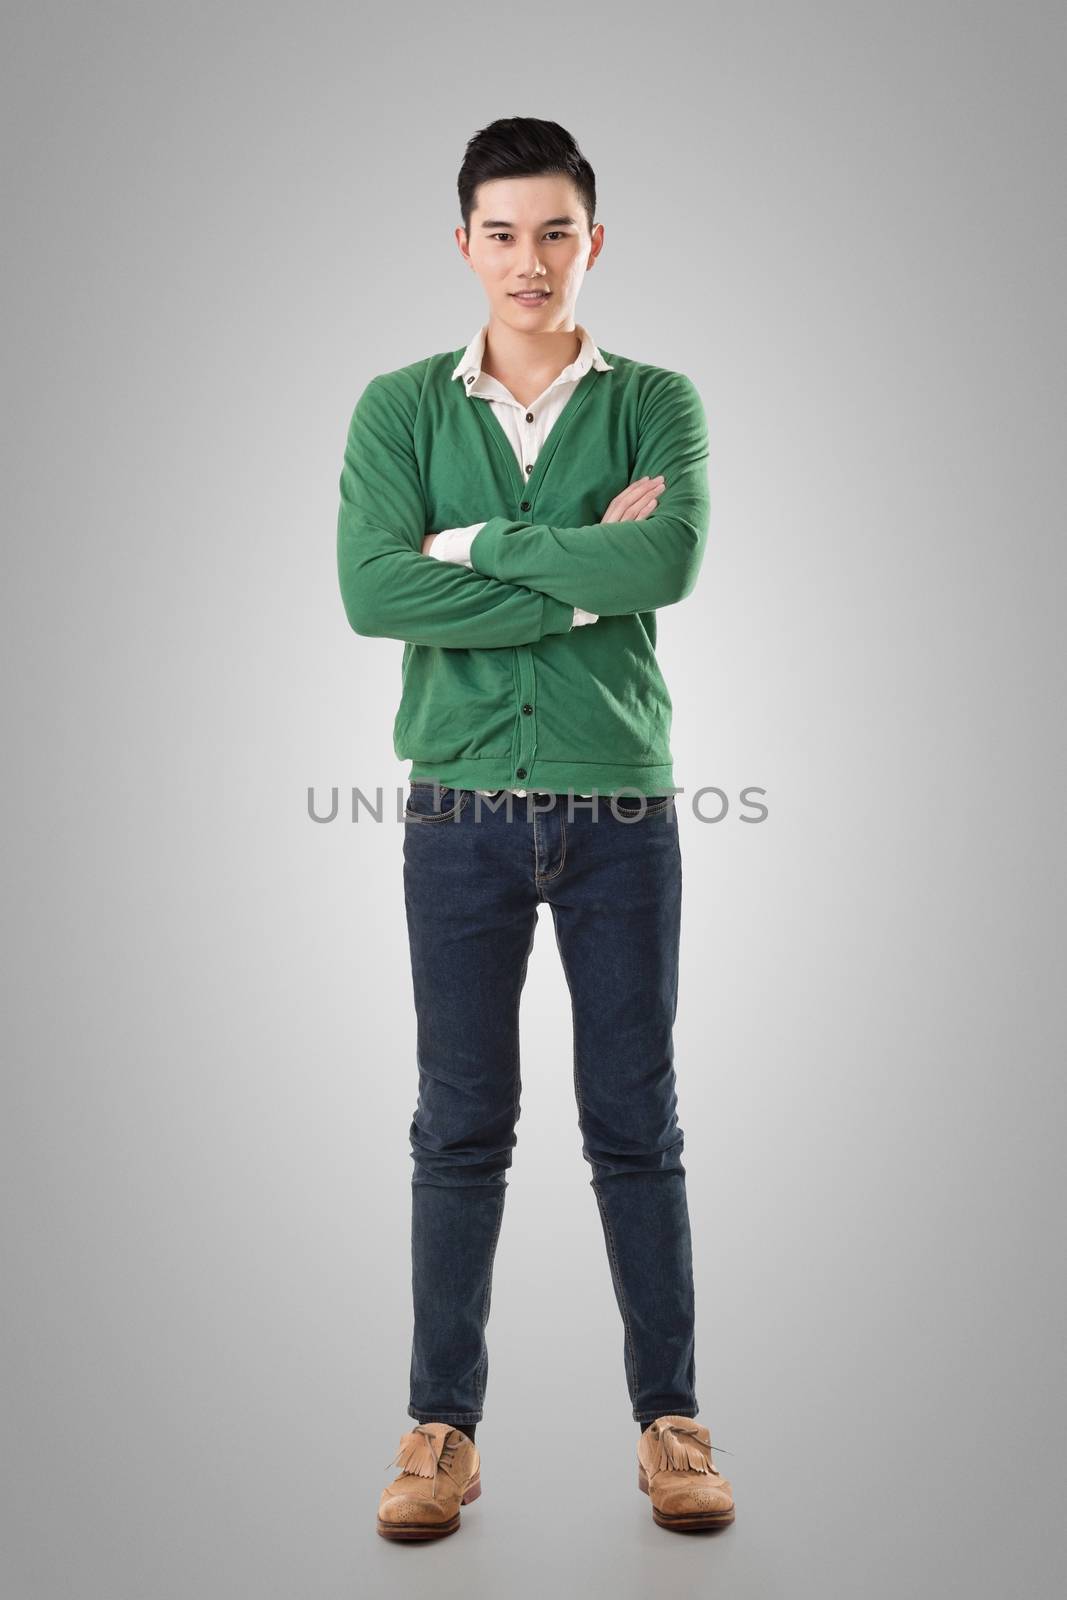 Attractive young Asian man, full length portrait isolated on white background.